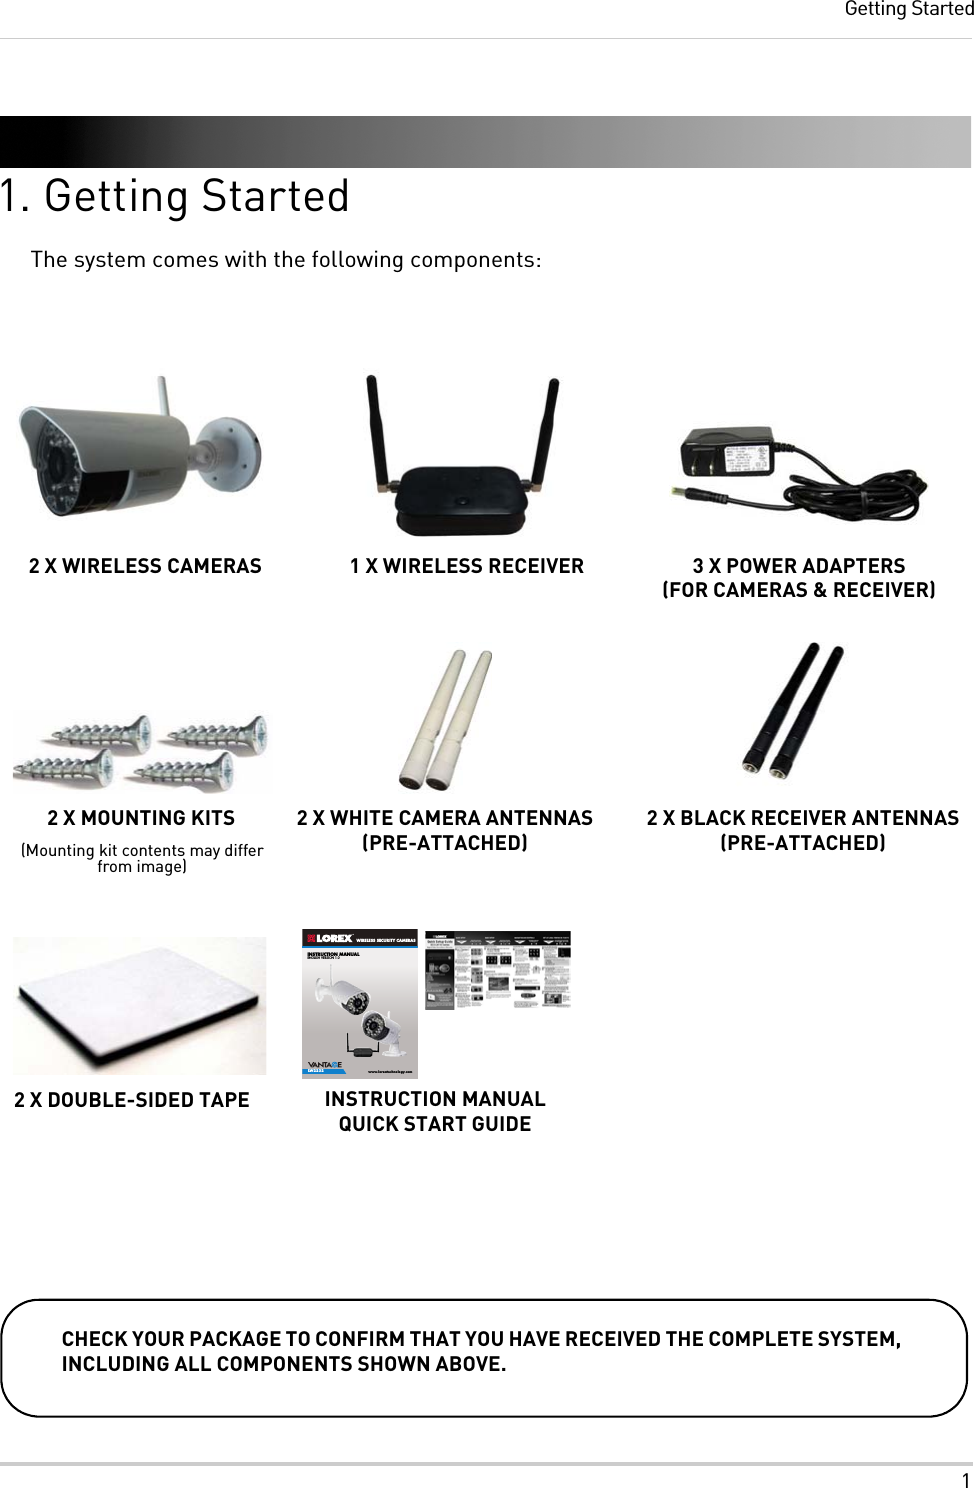 1Getting Started1. Getting StartedThe system comes with the following components:INSTRUCTION MANUALENGLISH VERSION 1.0www.lorextechnology.comLW2232WIRELESS SECURITY CAMERAS2 X MOUNTING KITS2 X WIRELESS CAMERAS 1 X WIRELESS RECEIVER 3 X POWER ADAPTERS (FOR CAMERAS &amp; RECEIVER)2 X BLACK RECEIVER ANTENNAS (PRE-ATTACHED)CHECK YOUR PACKAGE TO CONFIRM THAT YOU HAVE RECEIVED THE COMPLETE SYSTEM, INCLUDING ALL COMPONENTS SHOWN ABOVE. INSTRUCTION MANUALQUICK START GUIDE(Mounting kit contents may differ from image)2 X WHITE CAMERA ANTENNAS(PRE-ATTACHED)2 X DOUBLE-SIDED TAPE11